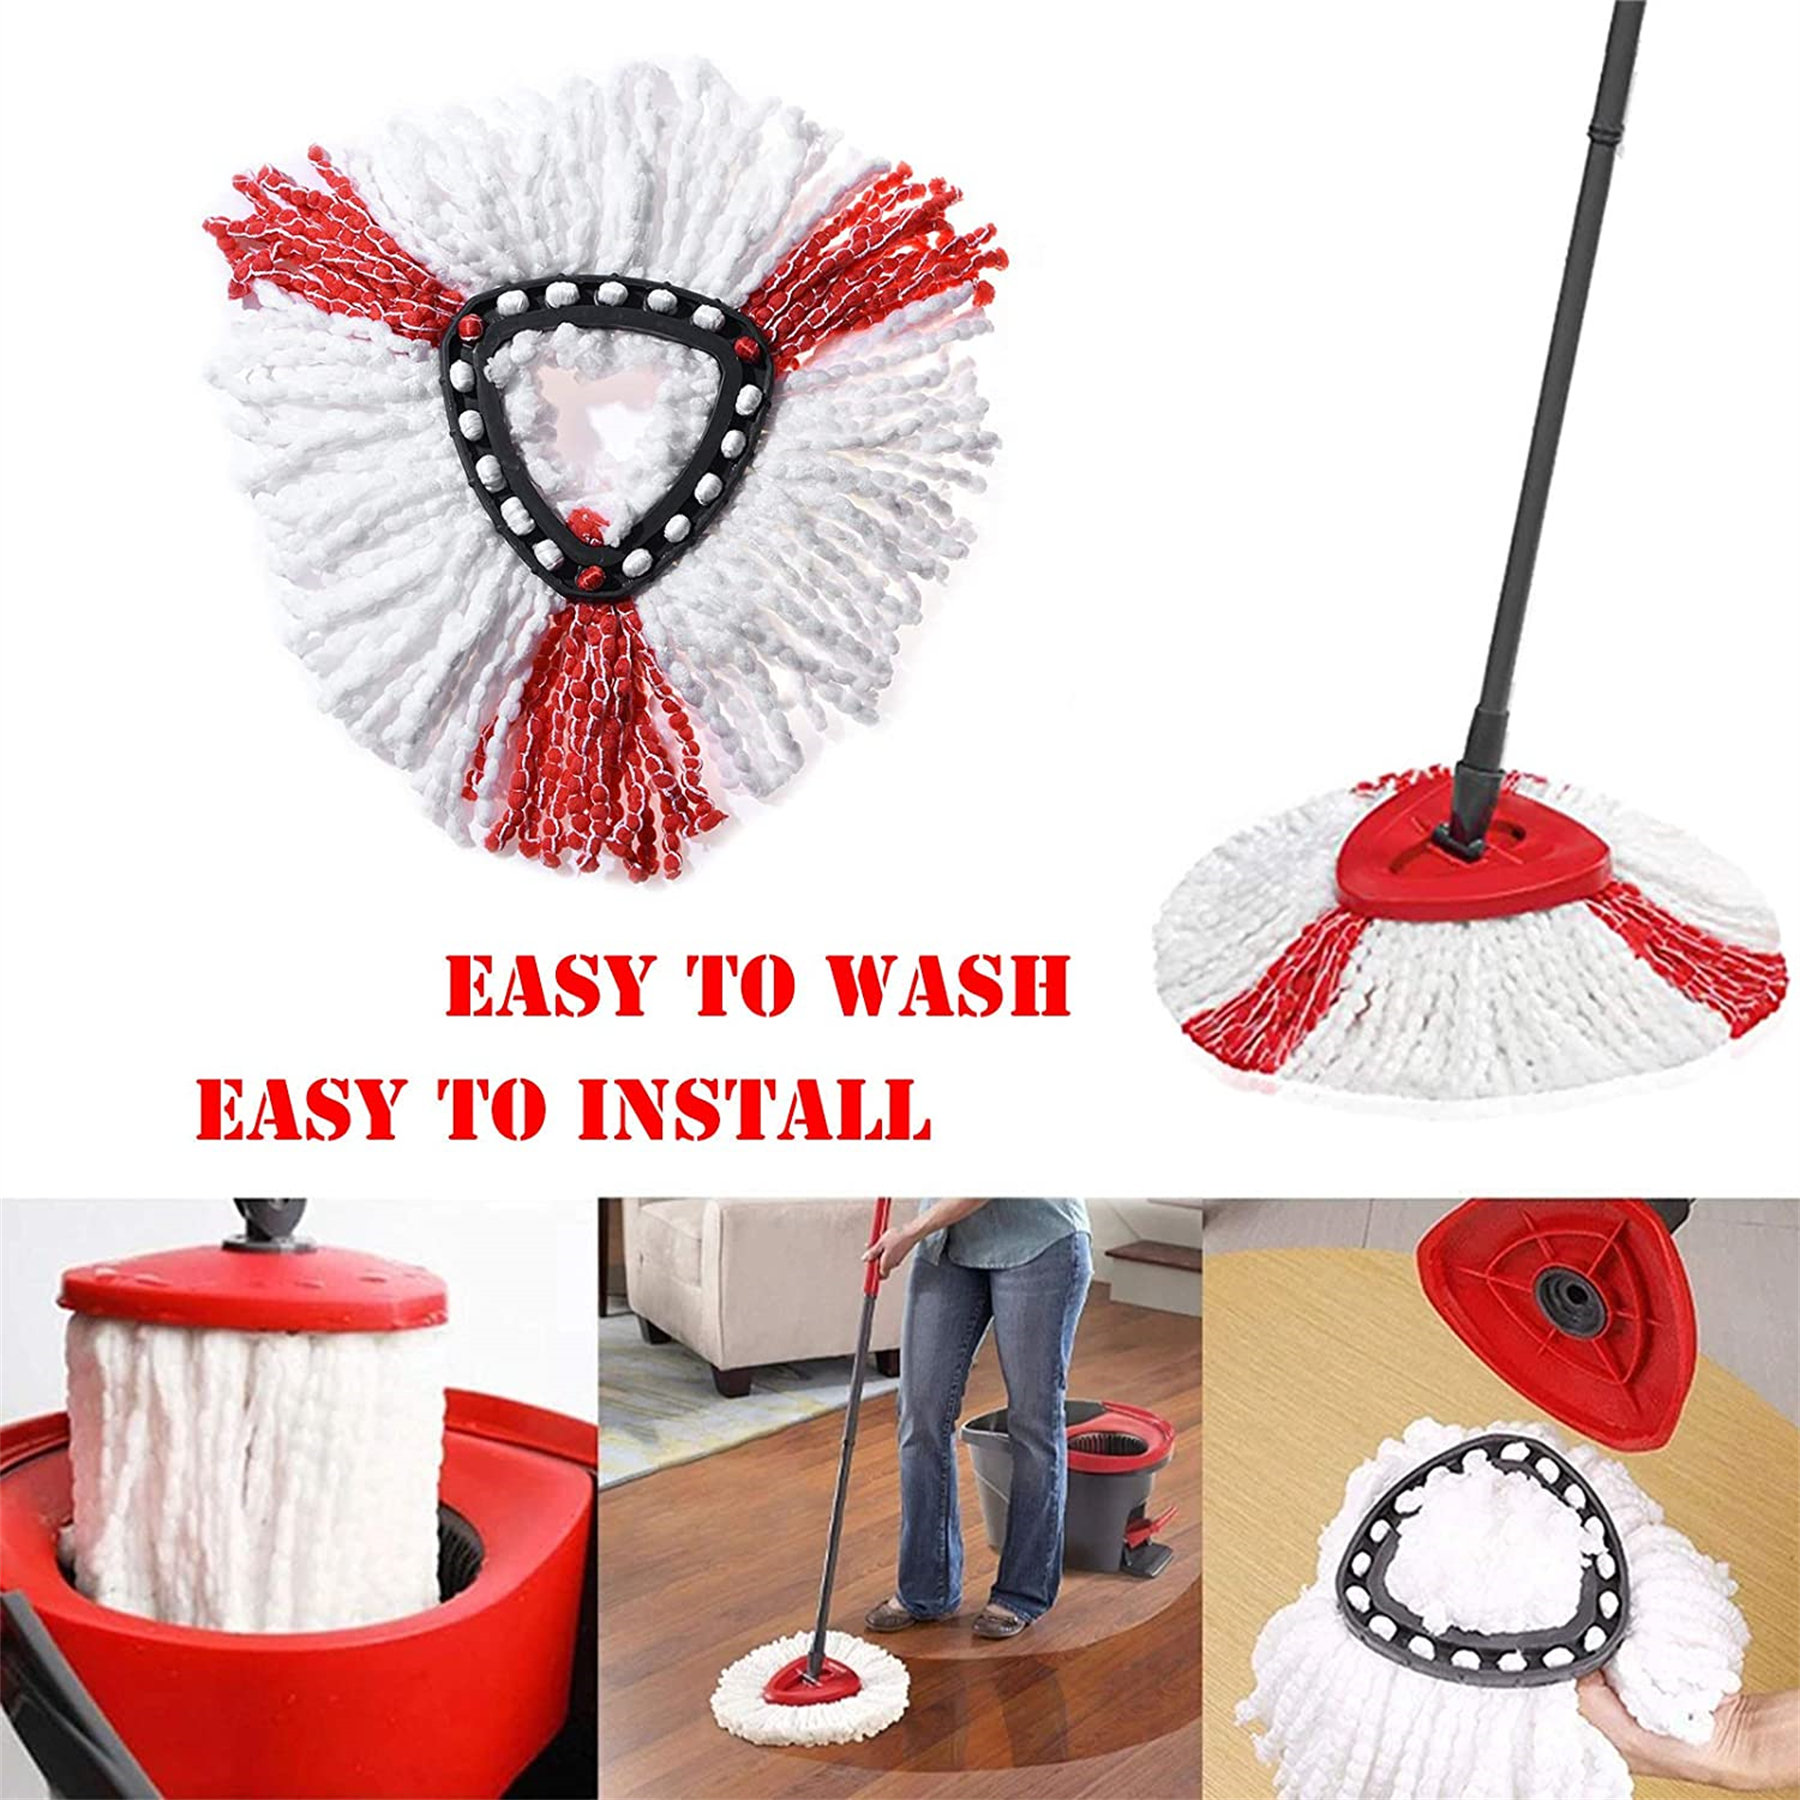 4 x Replacement Spin Mop Heads Microfiber for 360° Rotating Spin Mop Refill Mop 